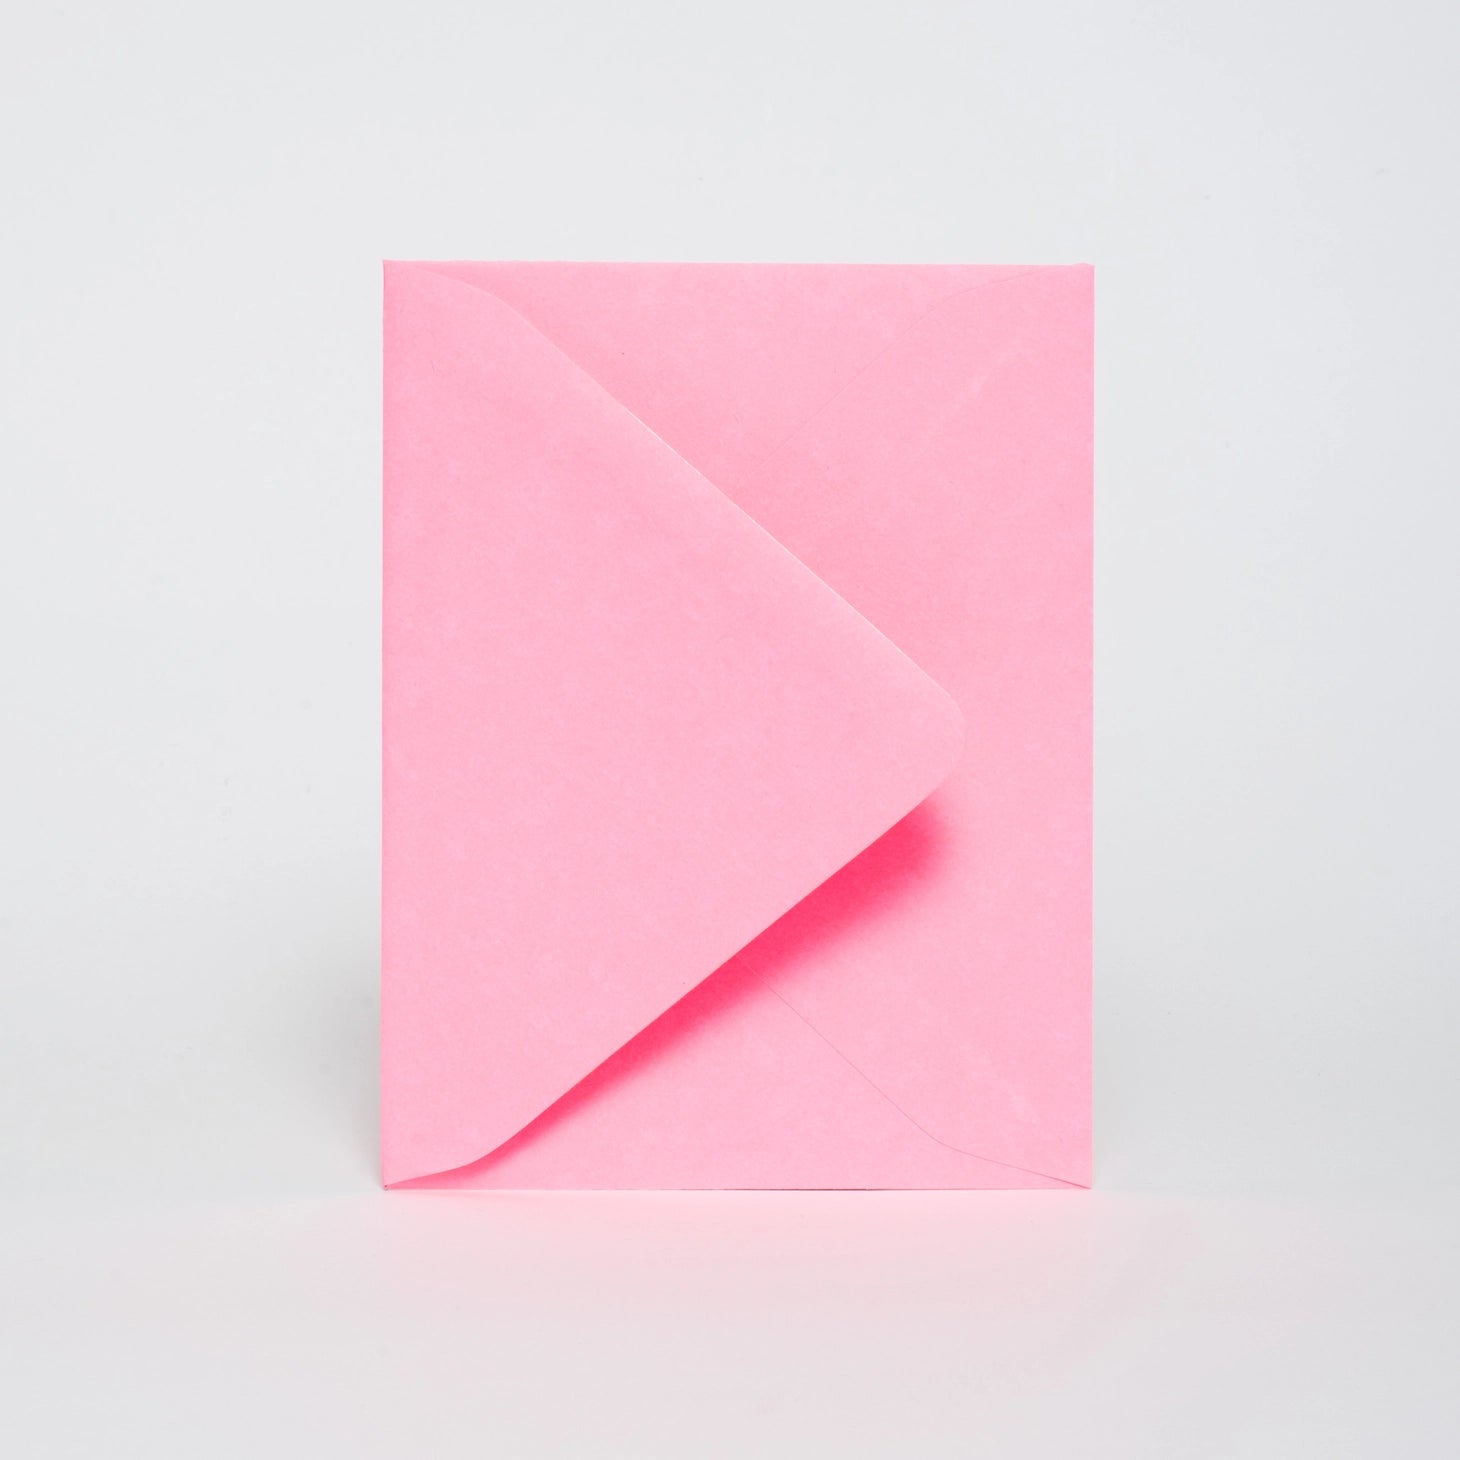 The included envelope for the card comes in pale pink.